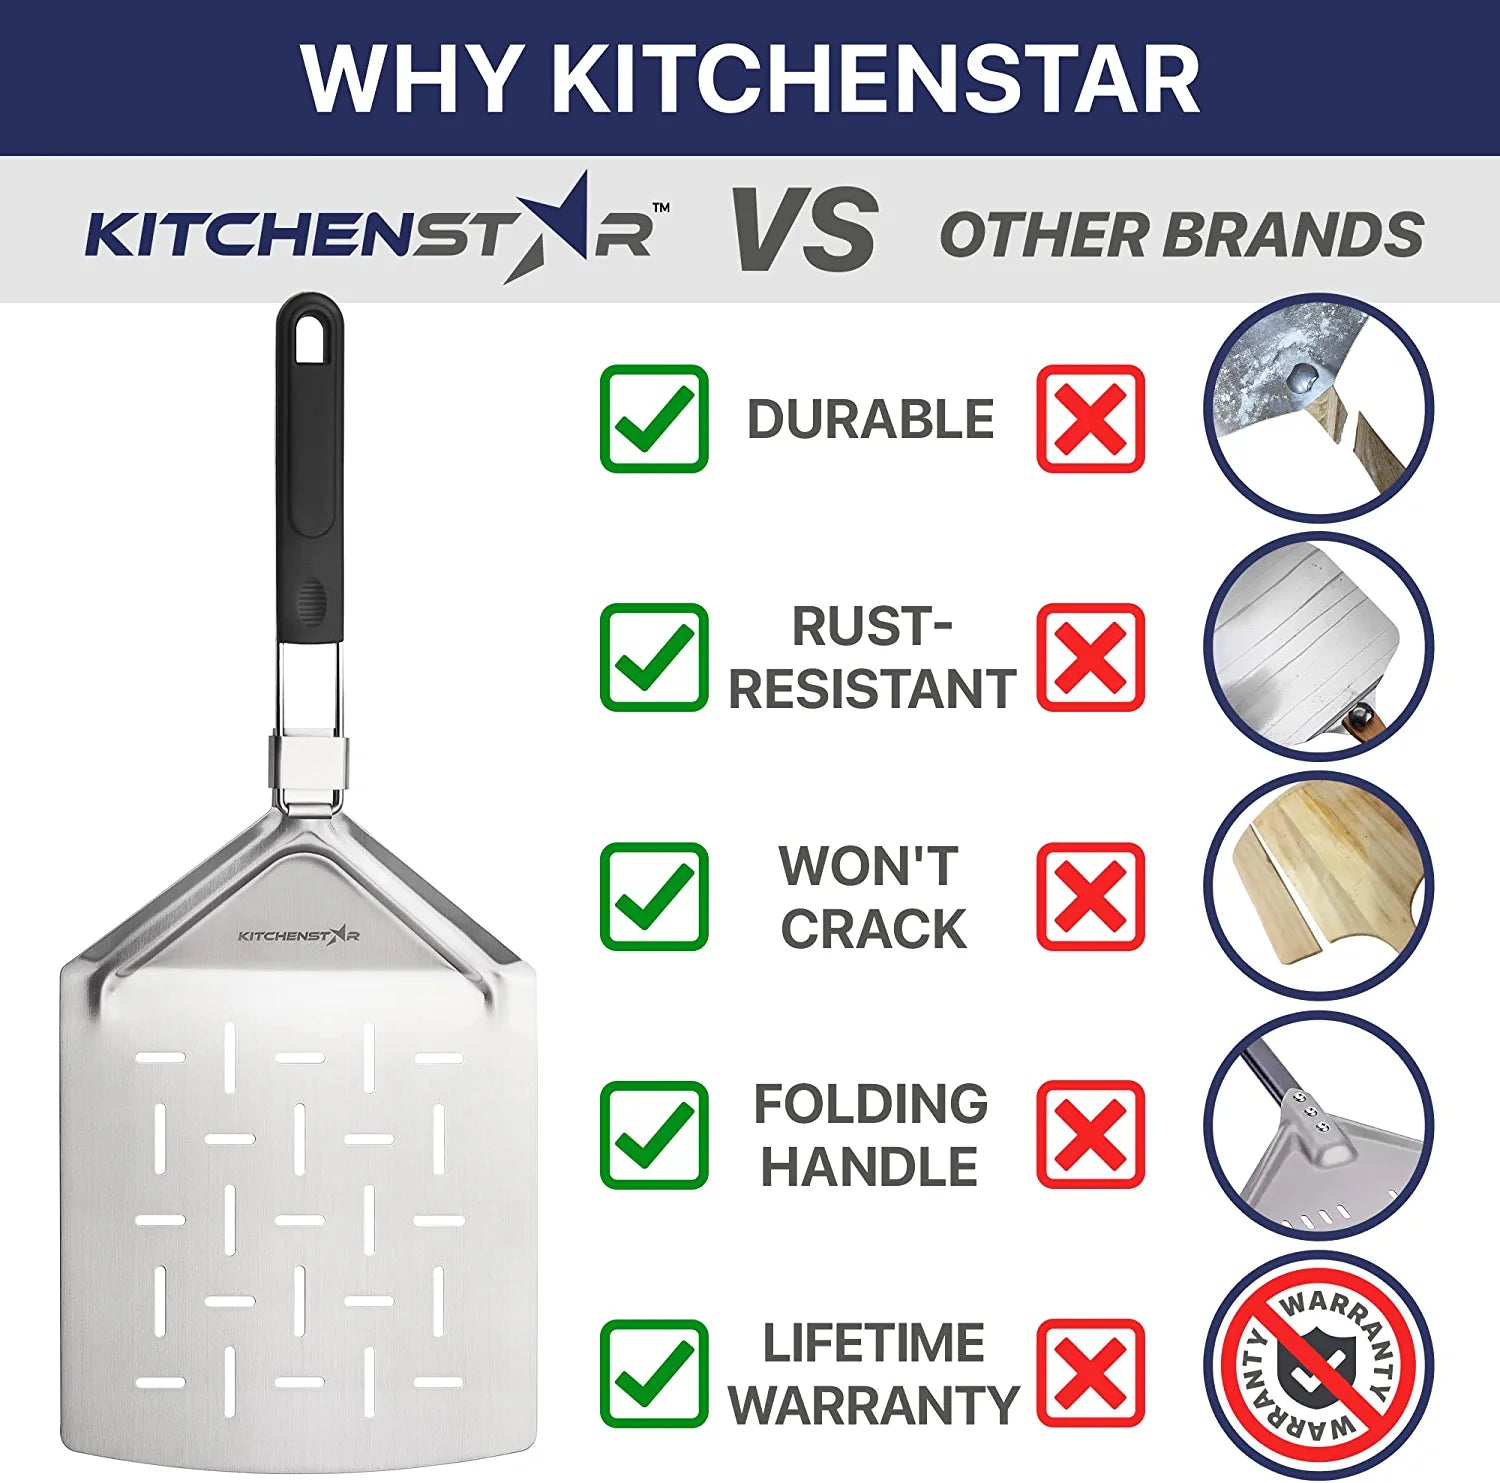 KitchenStar Perforated Stainless Steel Pizza Peel with Folding Handle (9.5 x 14 Inches) for Oven Pizza Turning, Placement and Retrieving - Professional Baking Tools Series